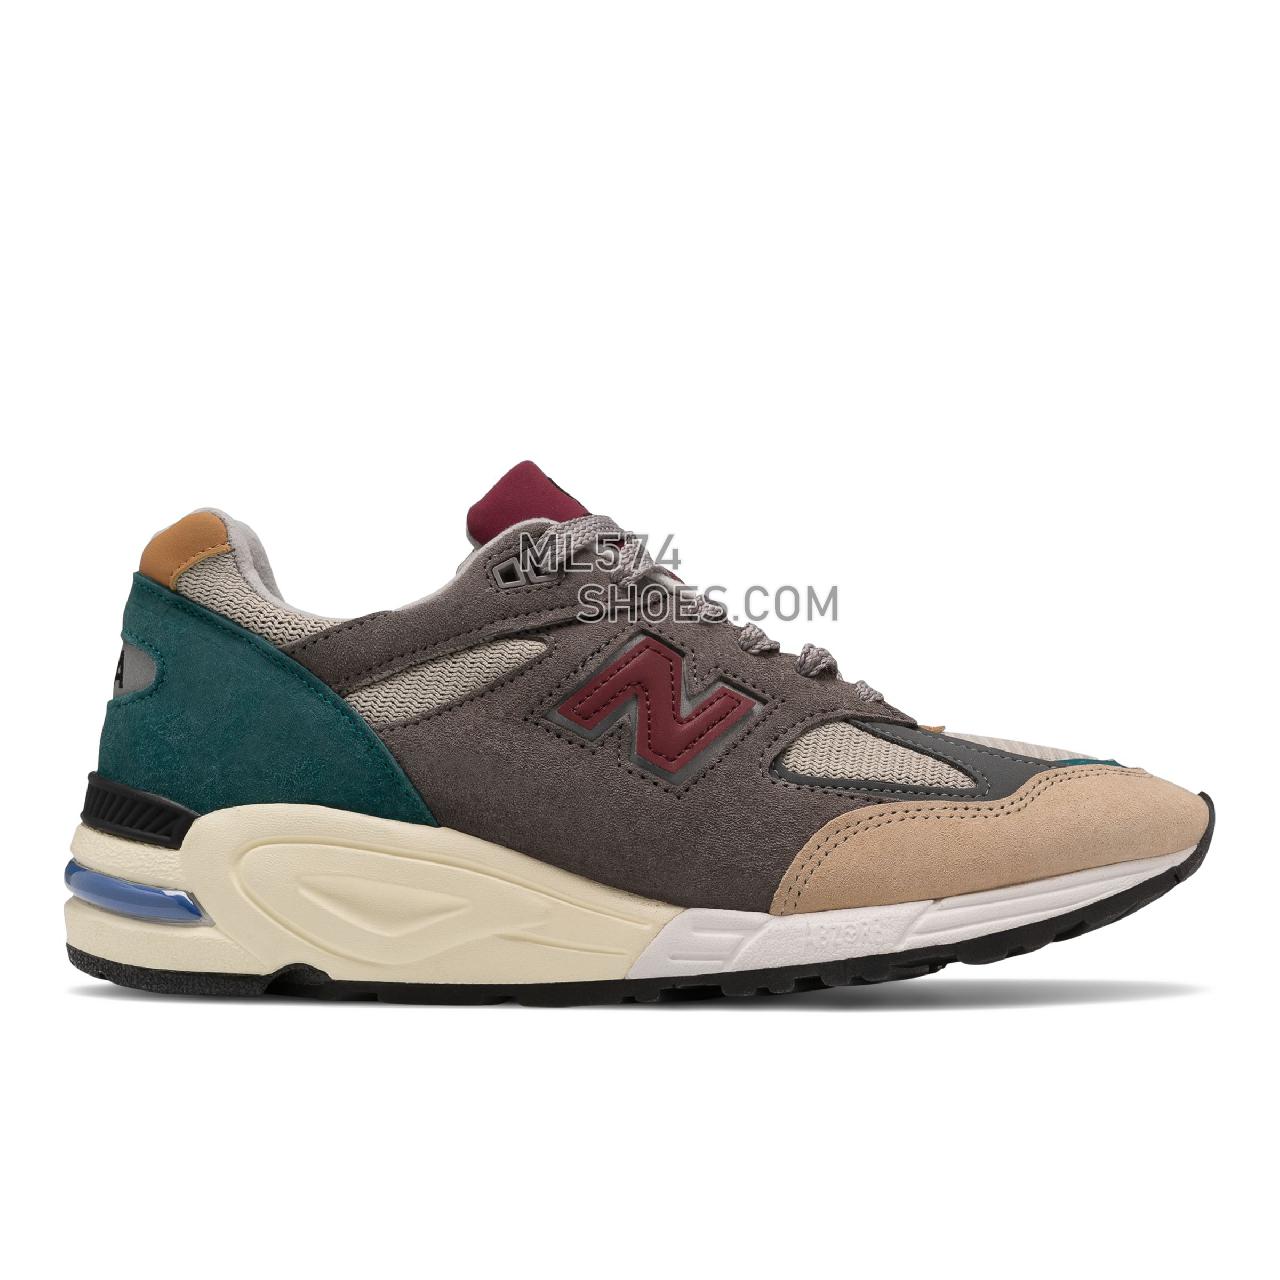 New Balance Made in USA 990v2 - Men's Made in USA And UK Sneakers - Grey with Tan - M990CP2